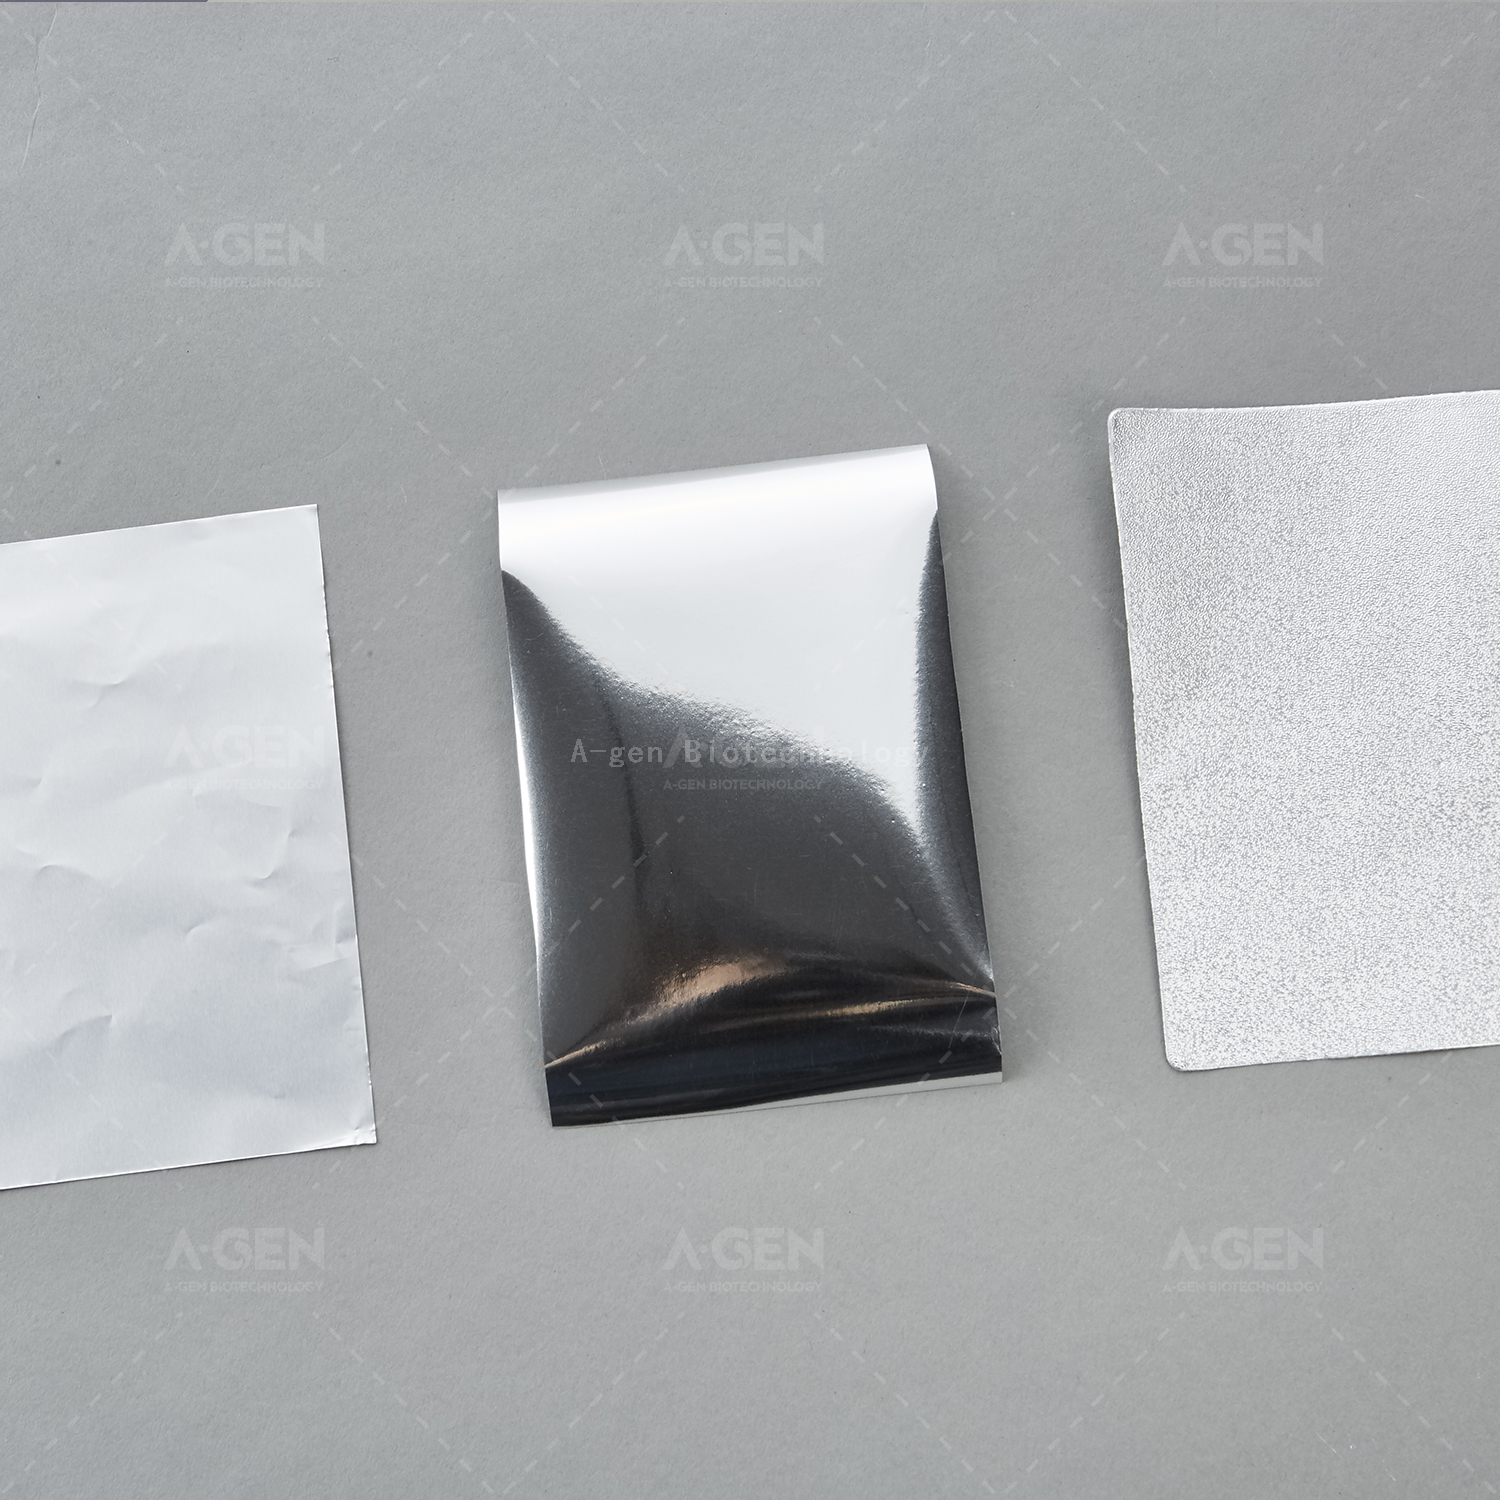 Hot Sealing Film F-002 for Deep Well Plate; PCR Palte,embossed